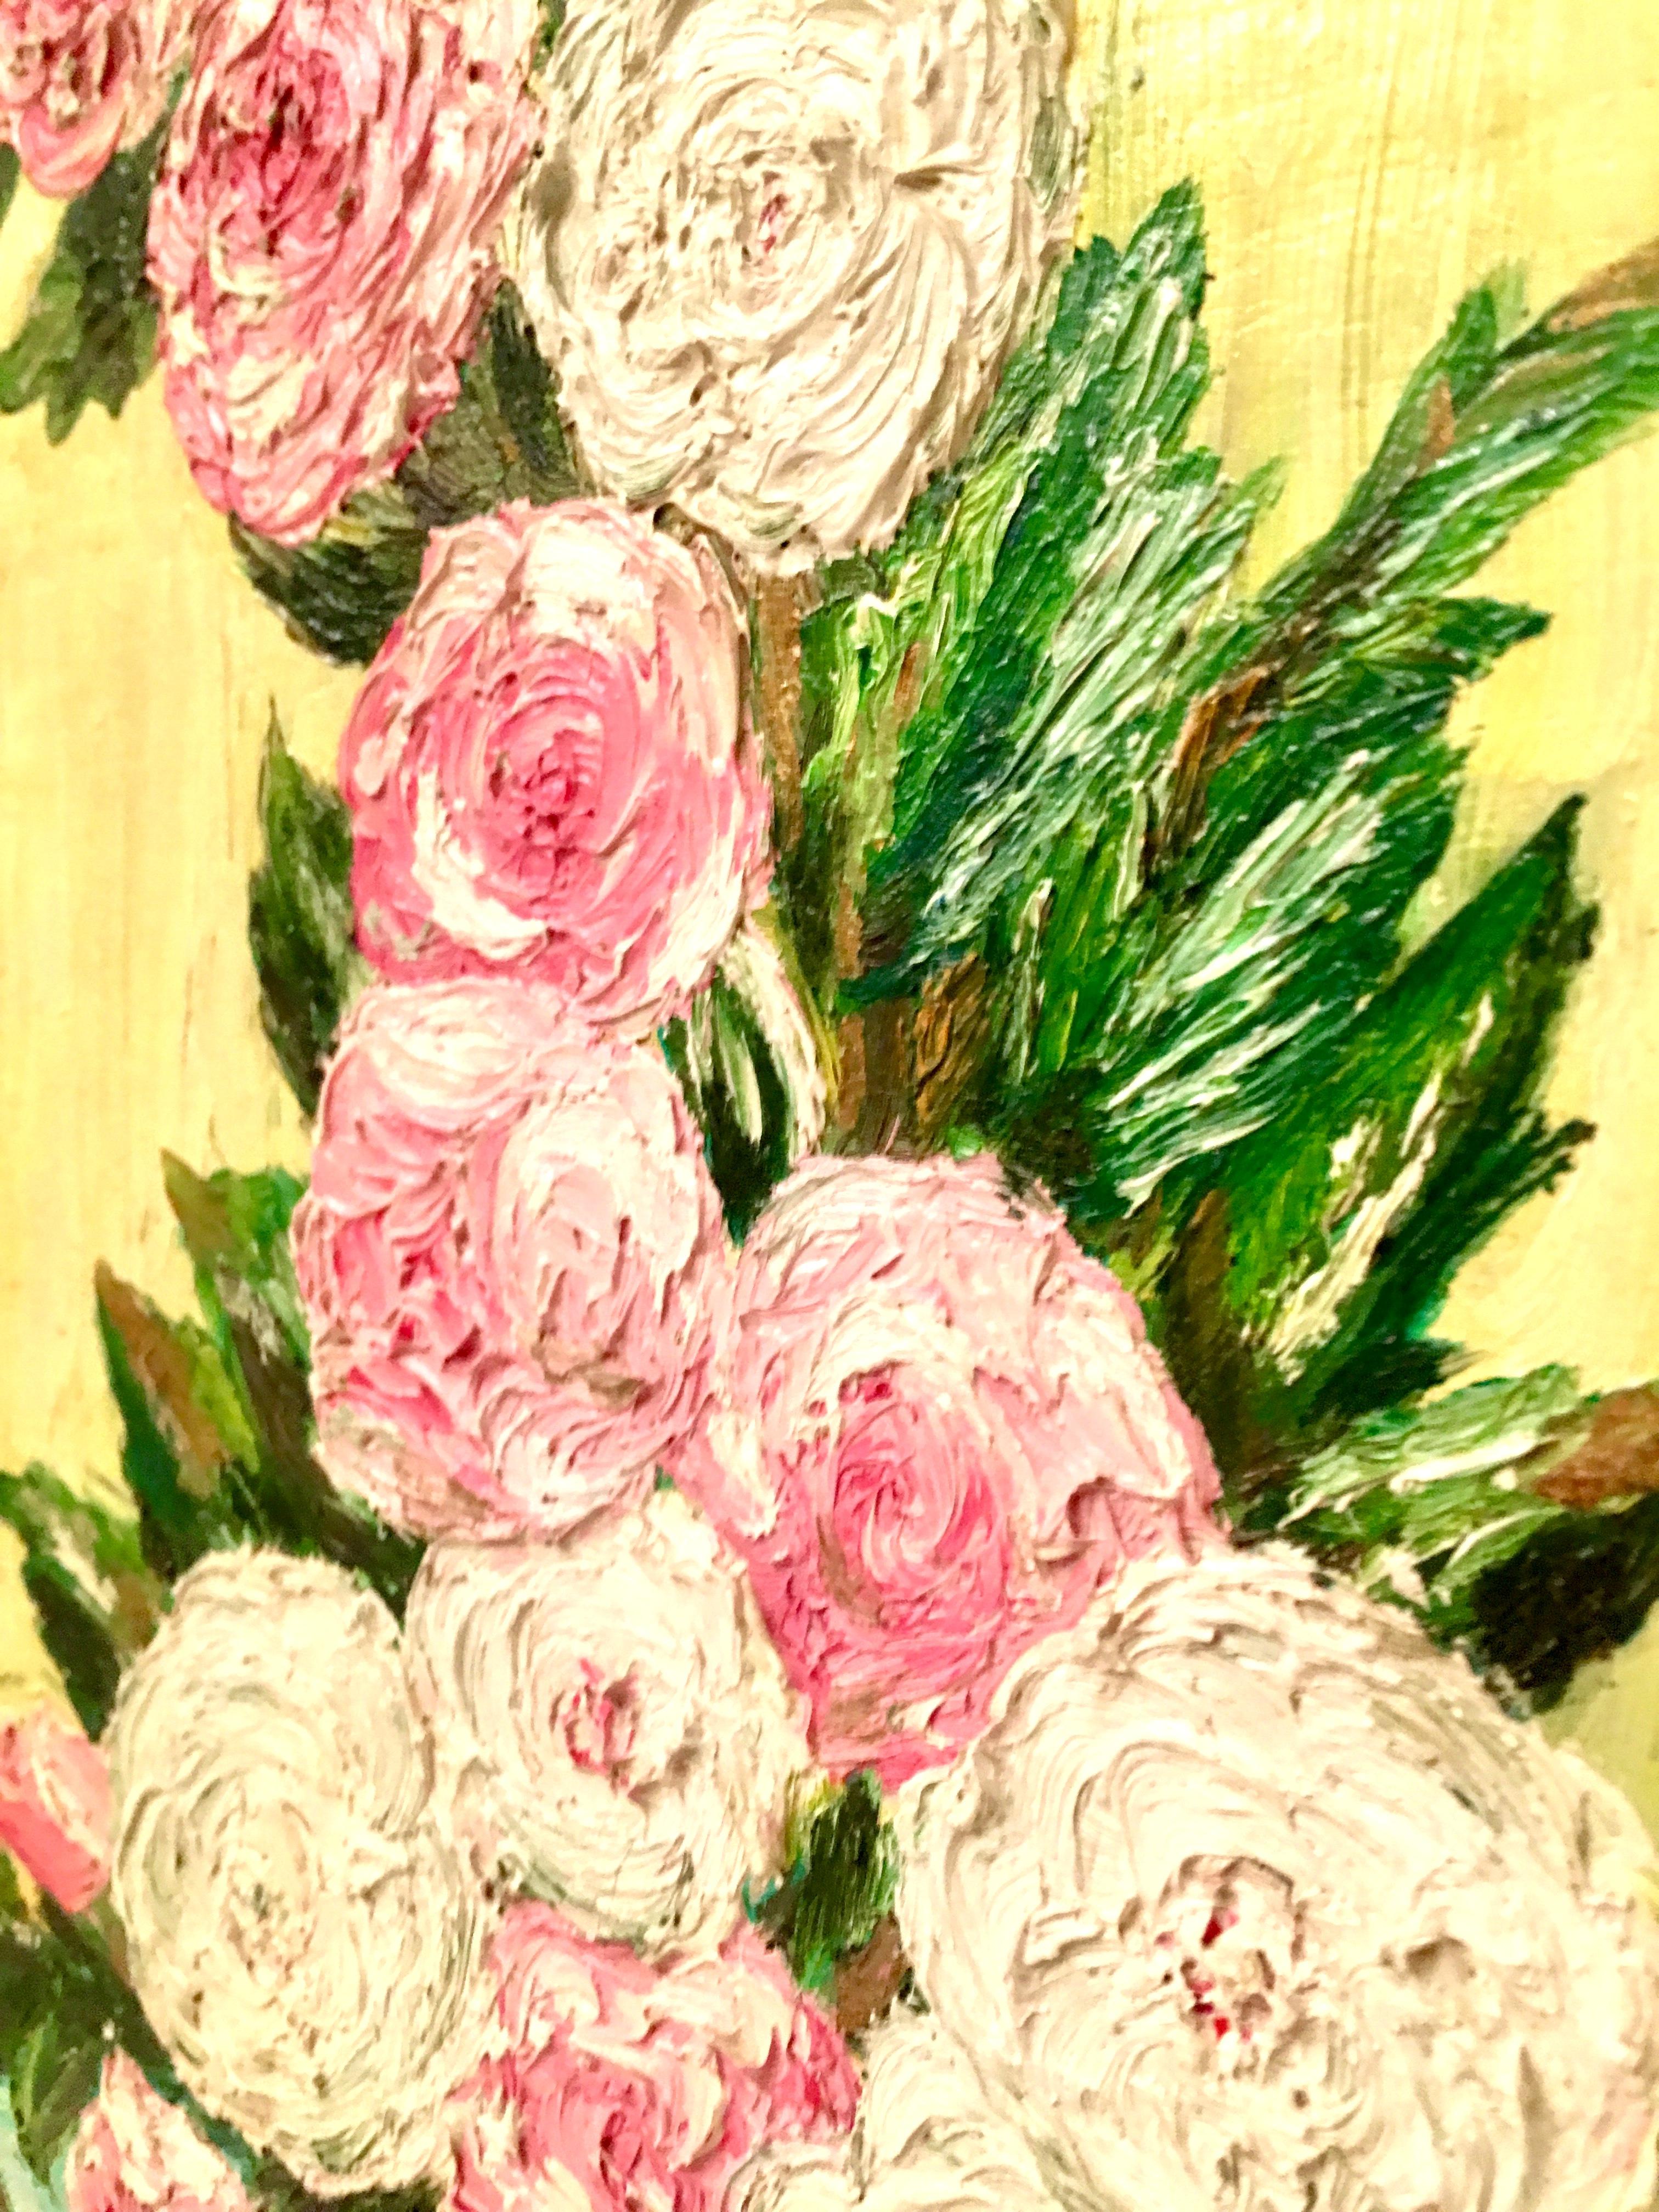 Metal 20th Century Original Oil On Canvas Still Life Flower Painting By Clara McKinney For Sale